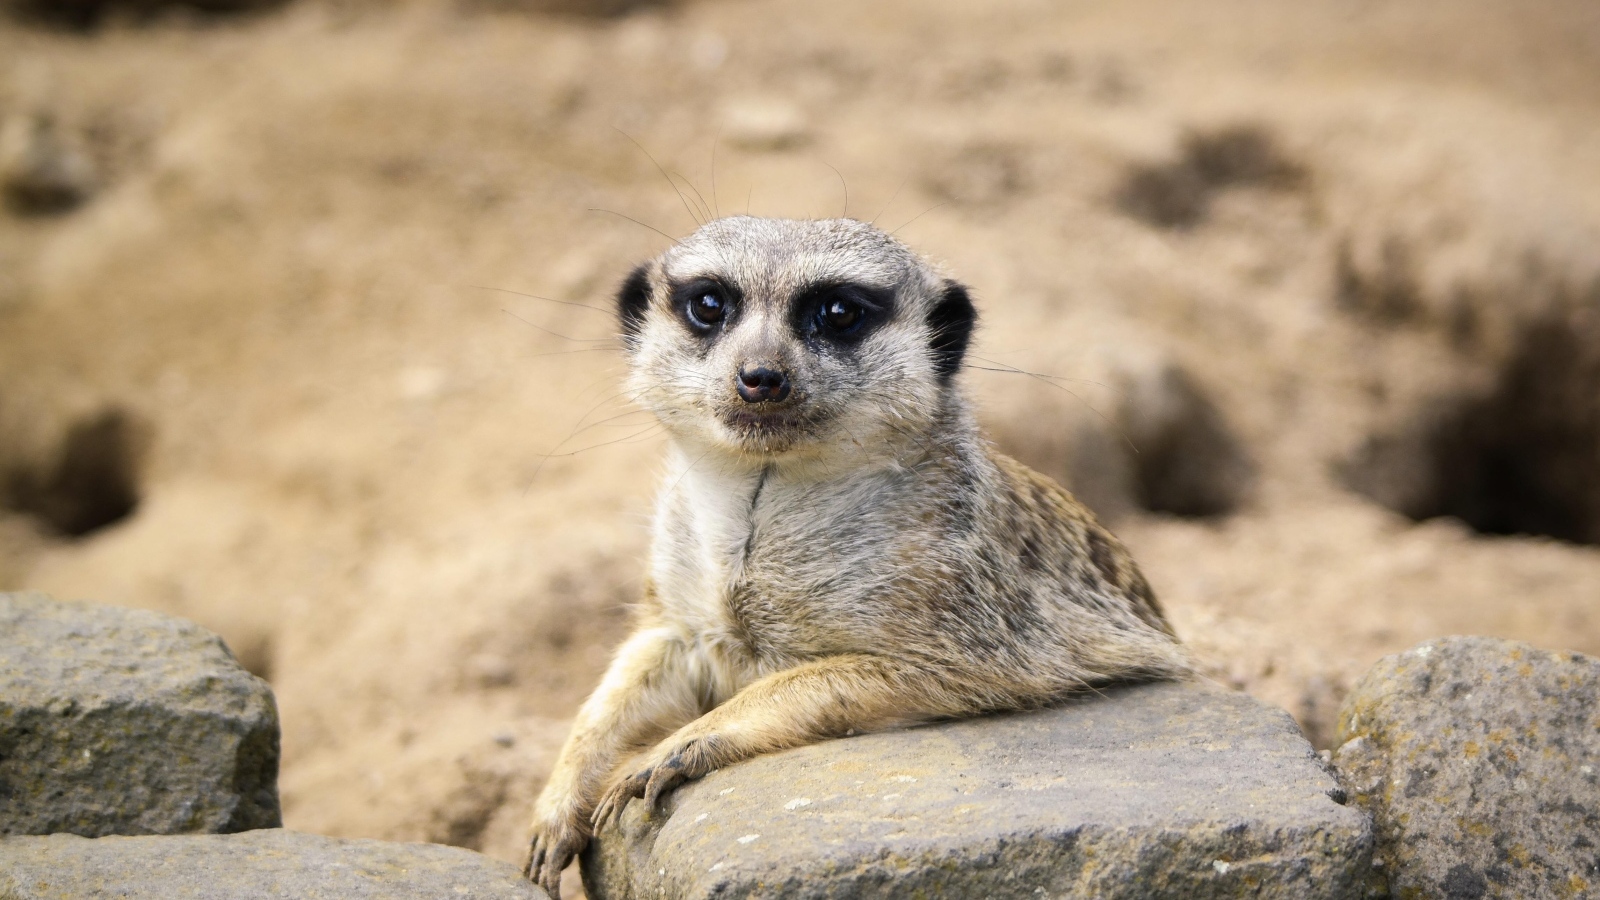 Meerkat with big eyes sits near a stone